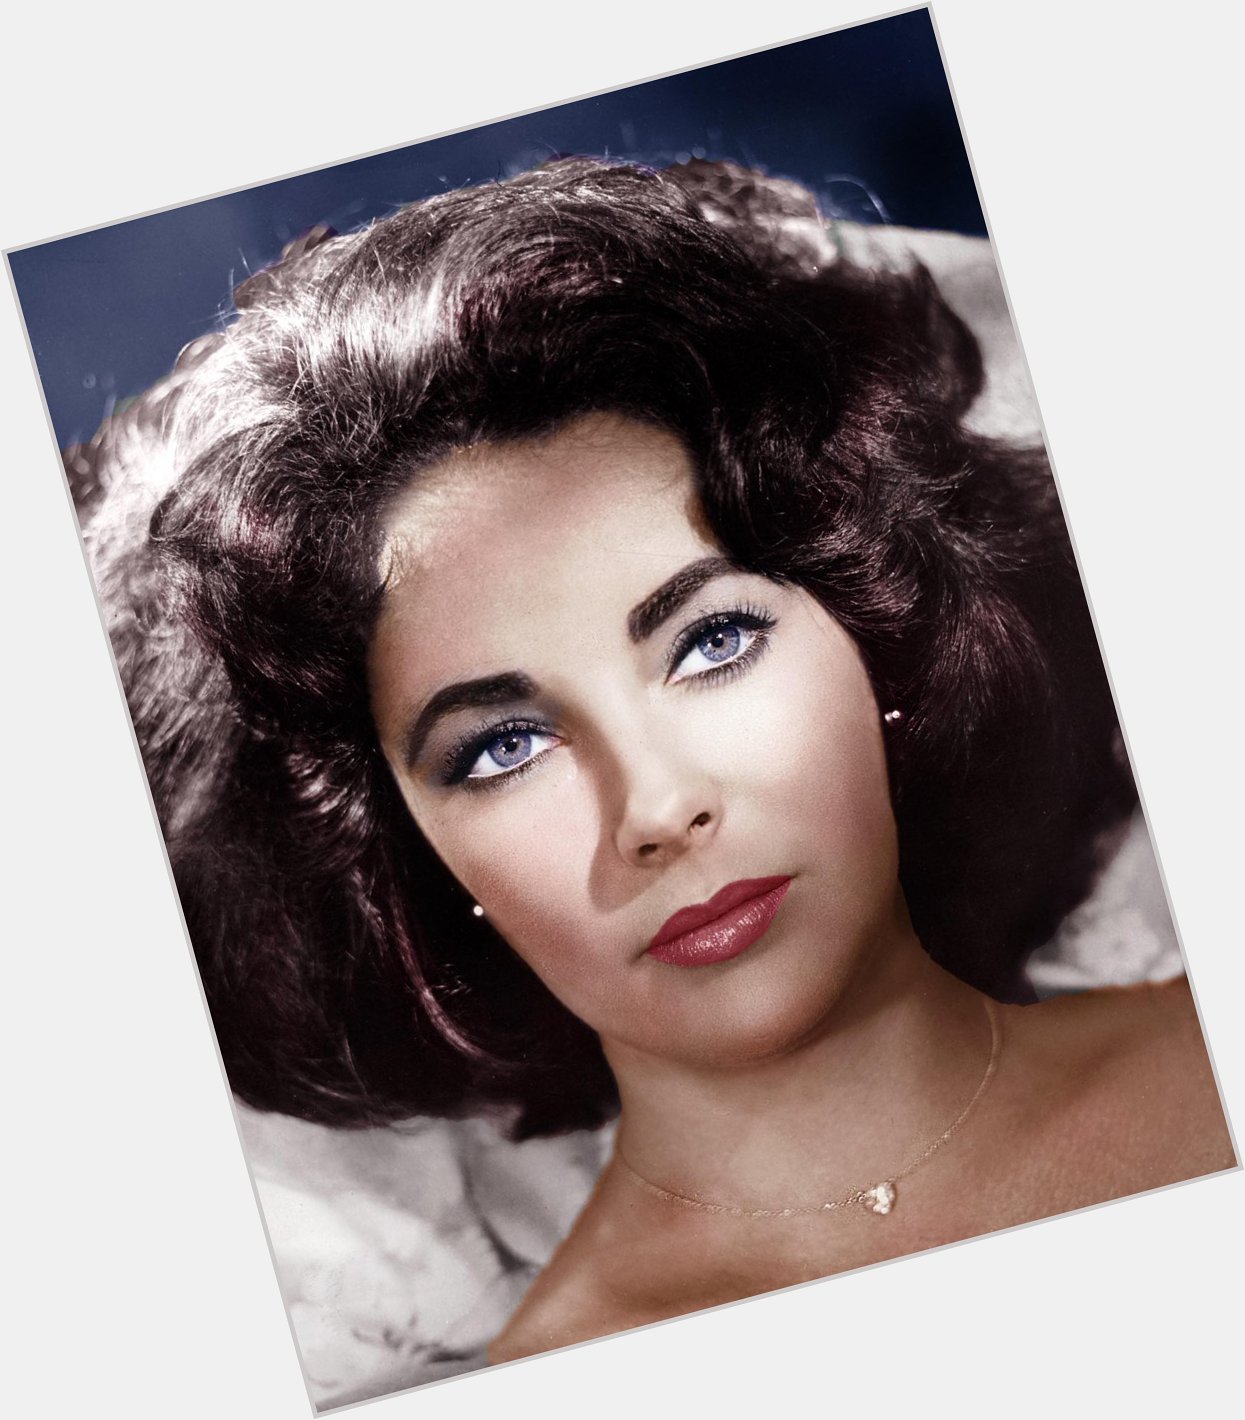 Happy Birthday to Elizabeth Taylor, who would have turned 83 today! 